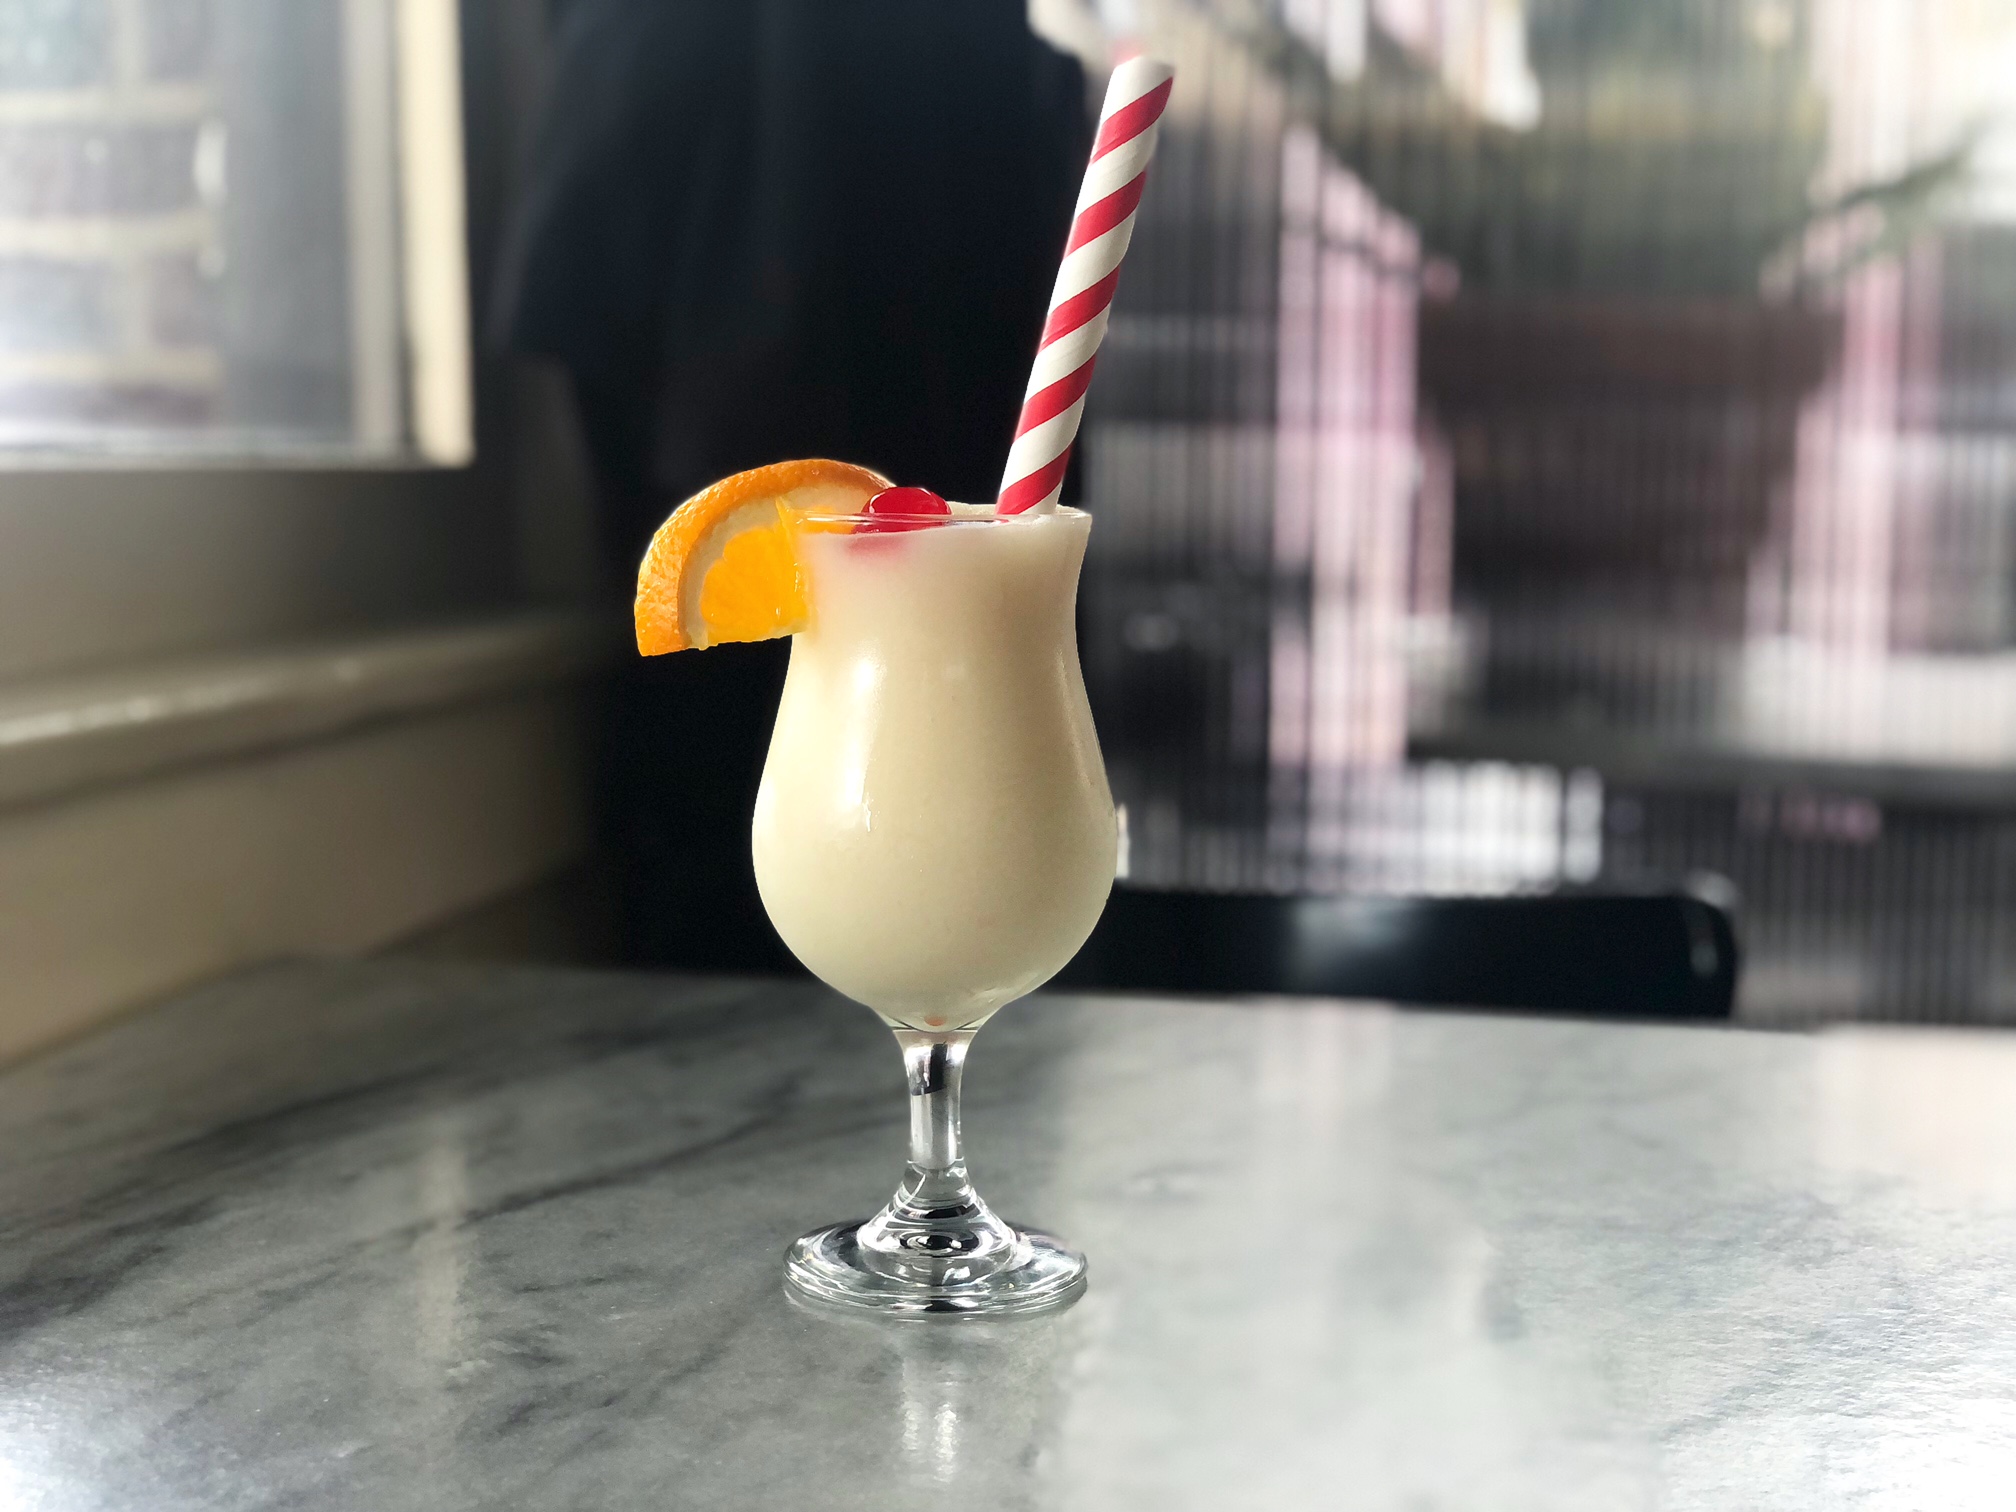 On a white marbled table at Farren's in Downtown Champaign, there is a white frozen colada slush with a striped straw. Photo by Alyssa Buckley.